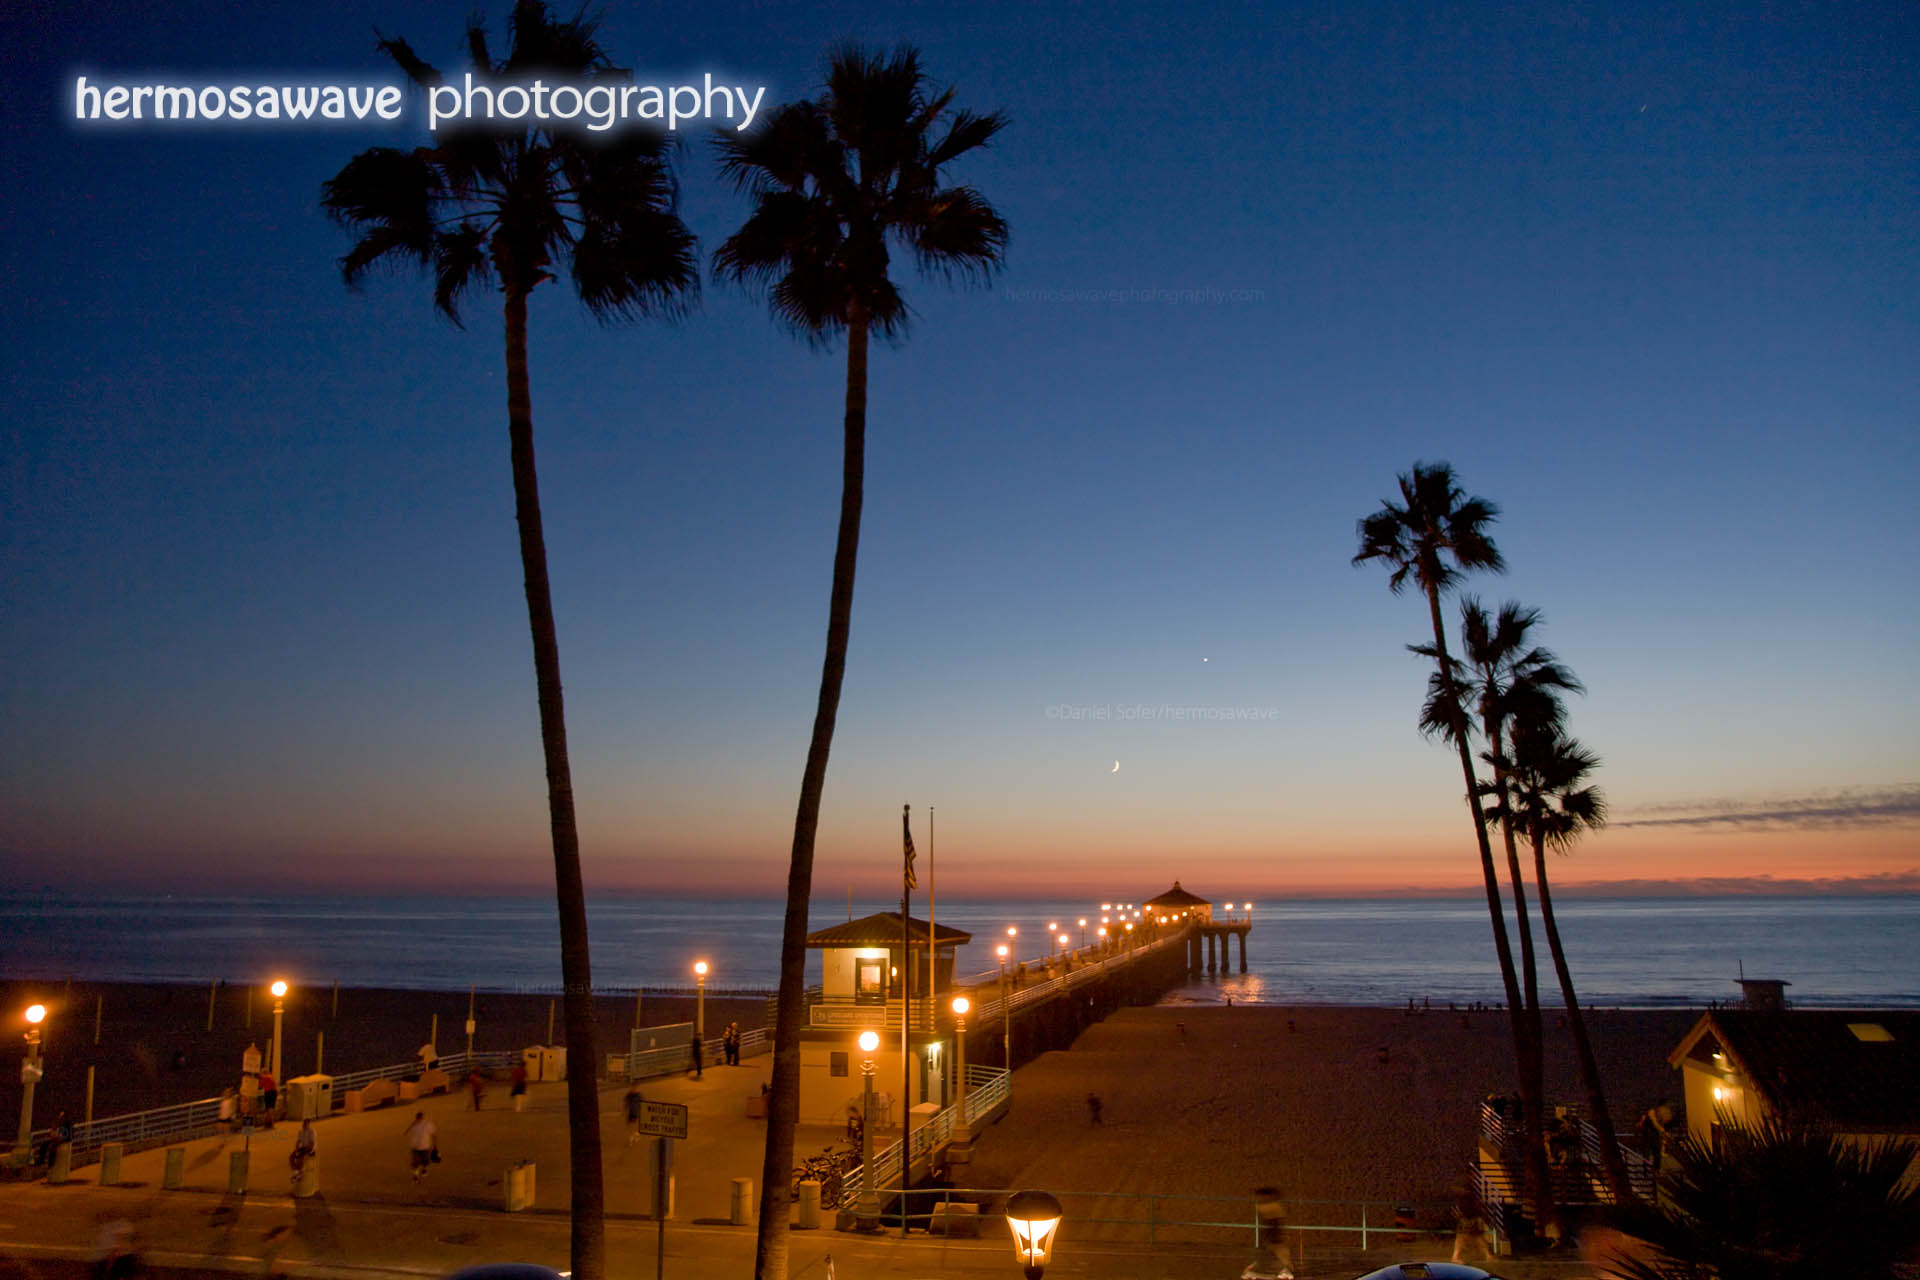 Two Palms and a Pier